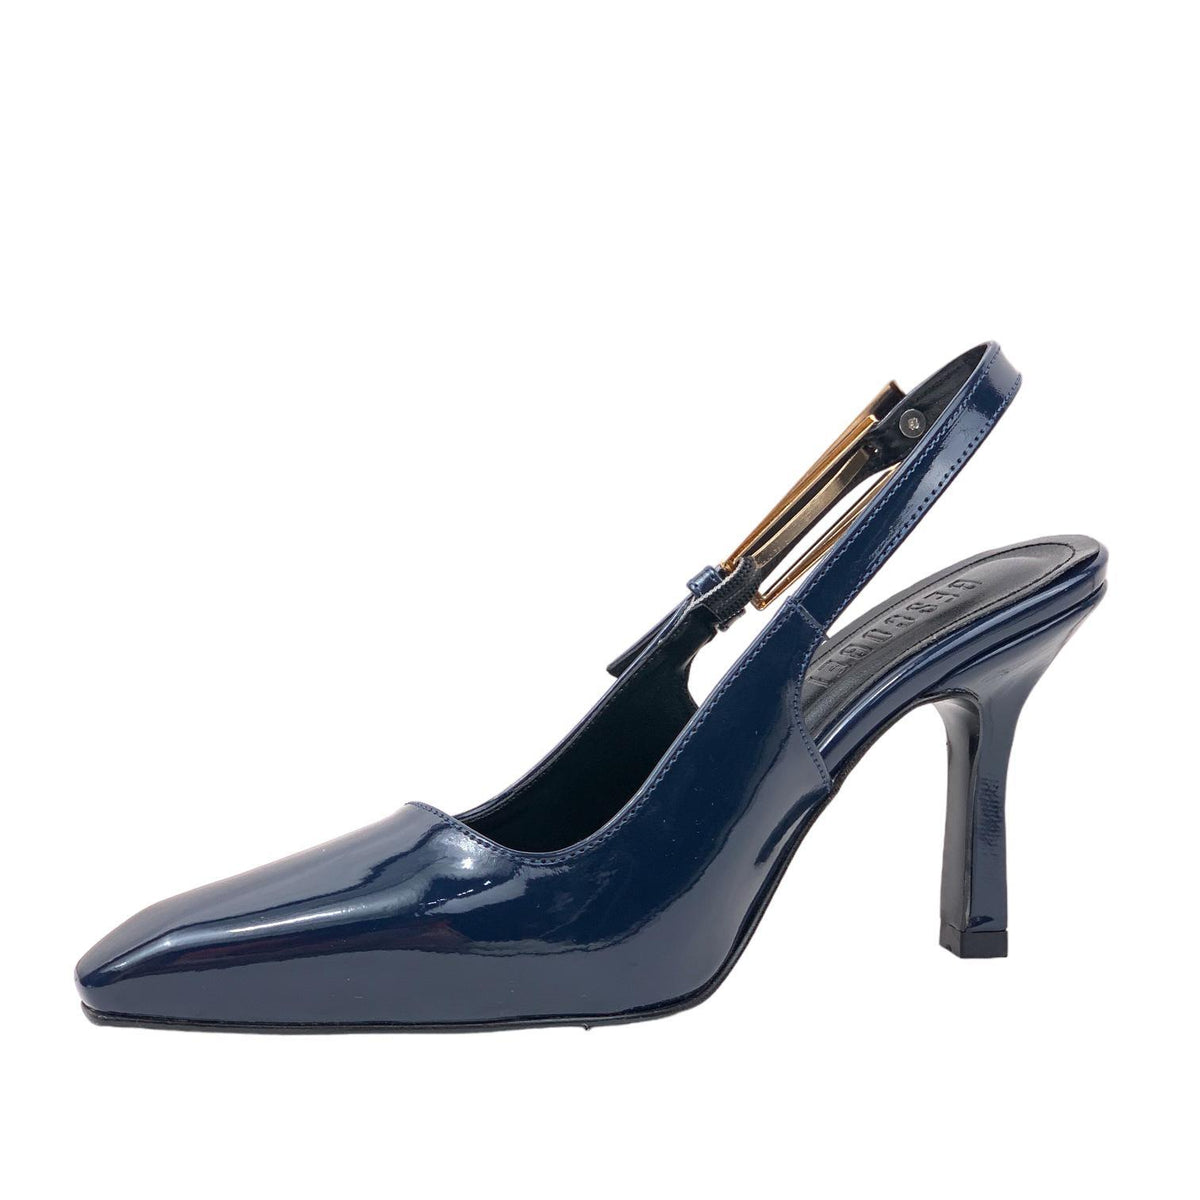 Women's Lery Navy Blue Patent Leather Heeled Shoes 9 cm - STREETMODE™